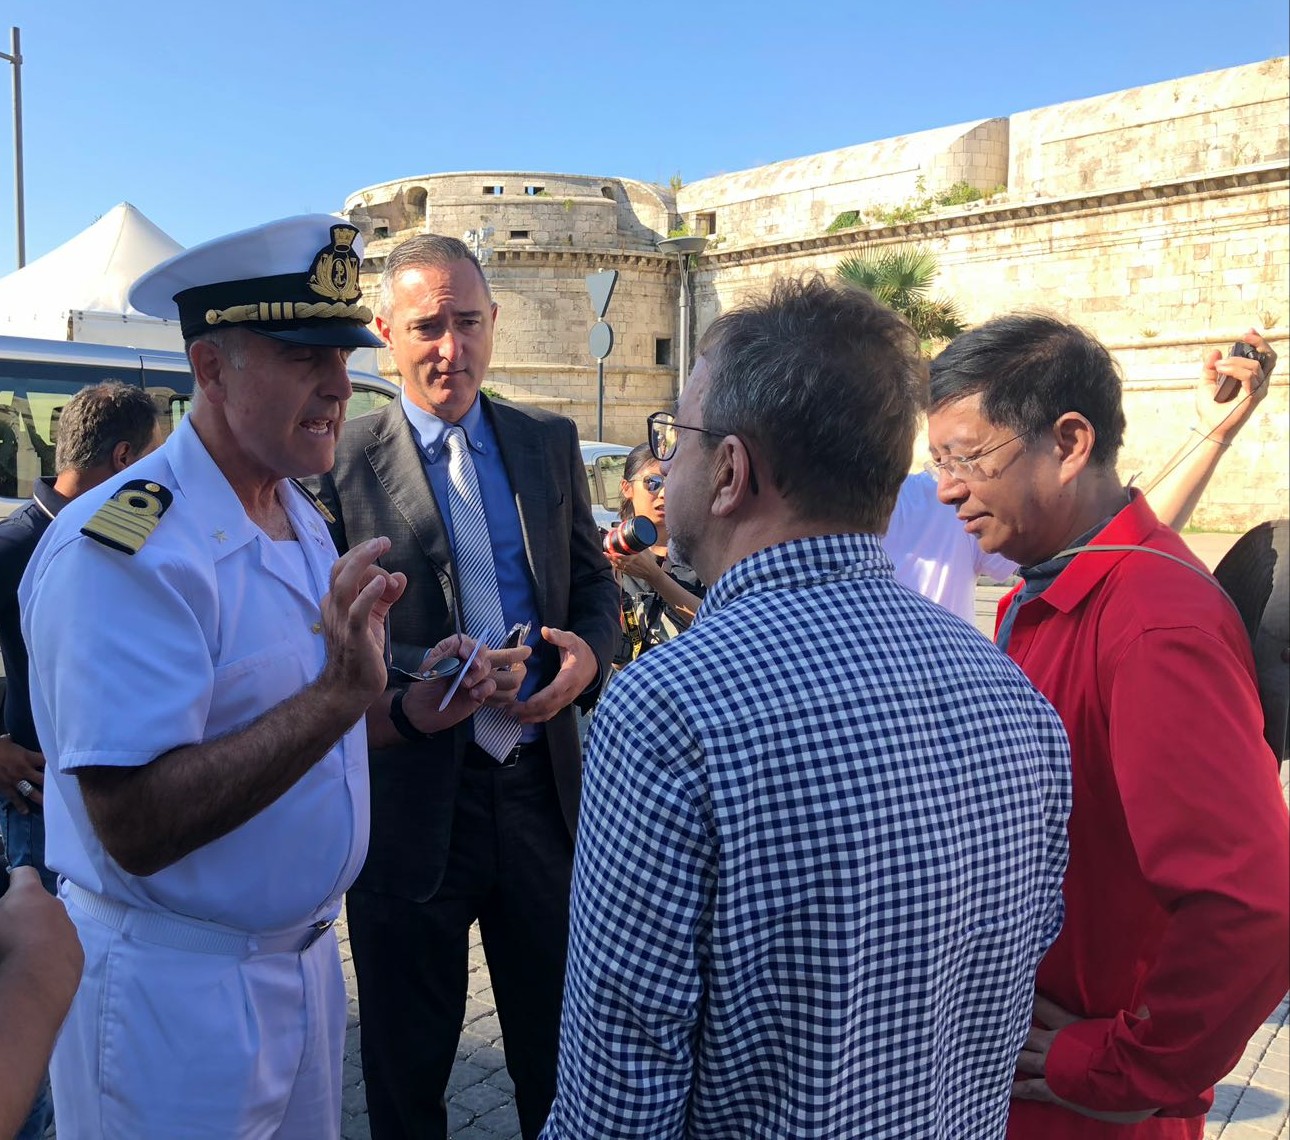 Delegation of CCTV, Chinese TV, at the historic port of Civitavecchia for the shooting of “From Xi’an to Rome” (left to right: Captain Vincenzo Leone and Manger of the AdSP Malcom Morini)